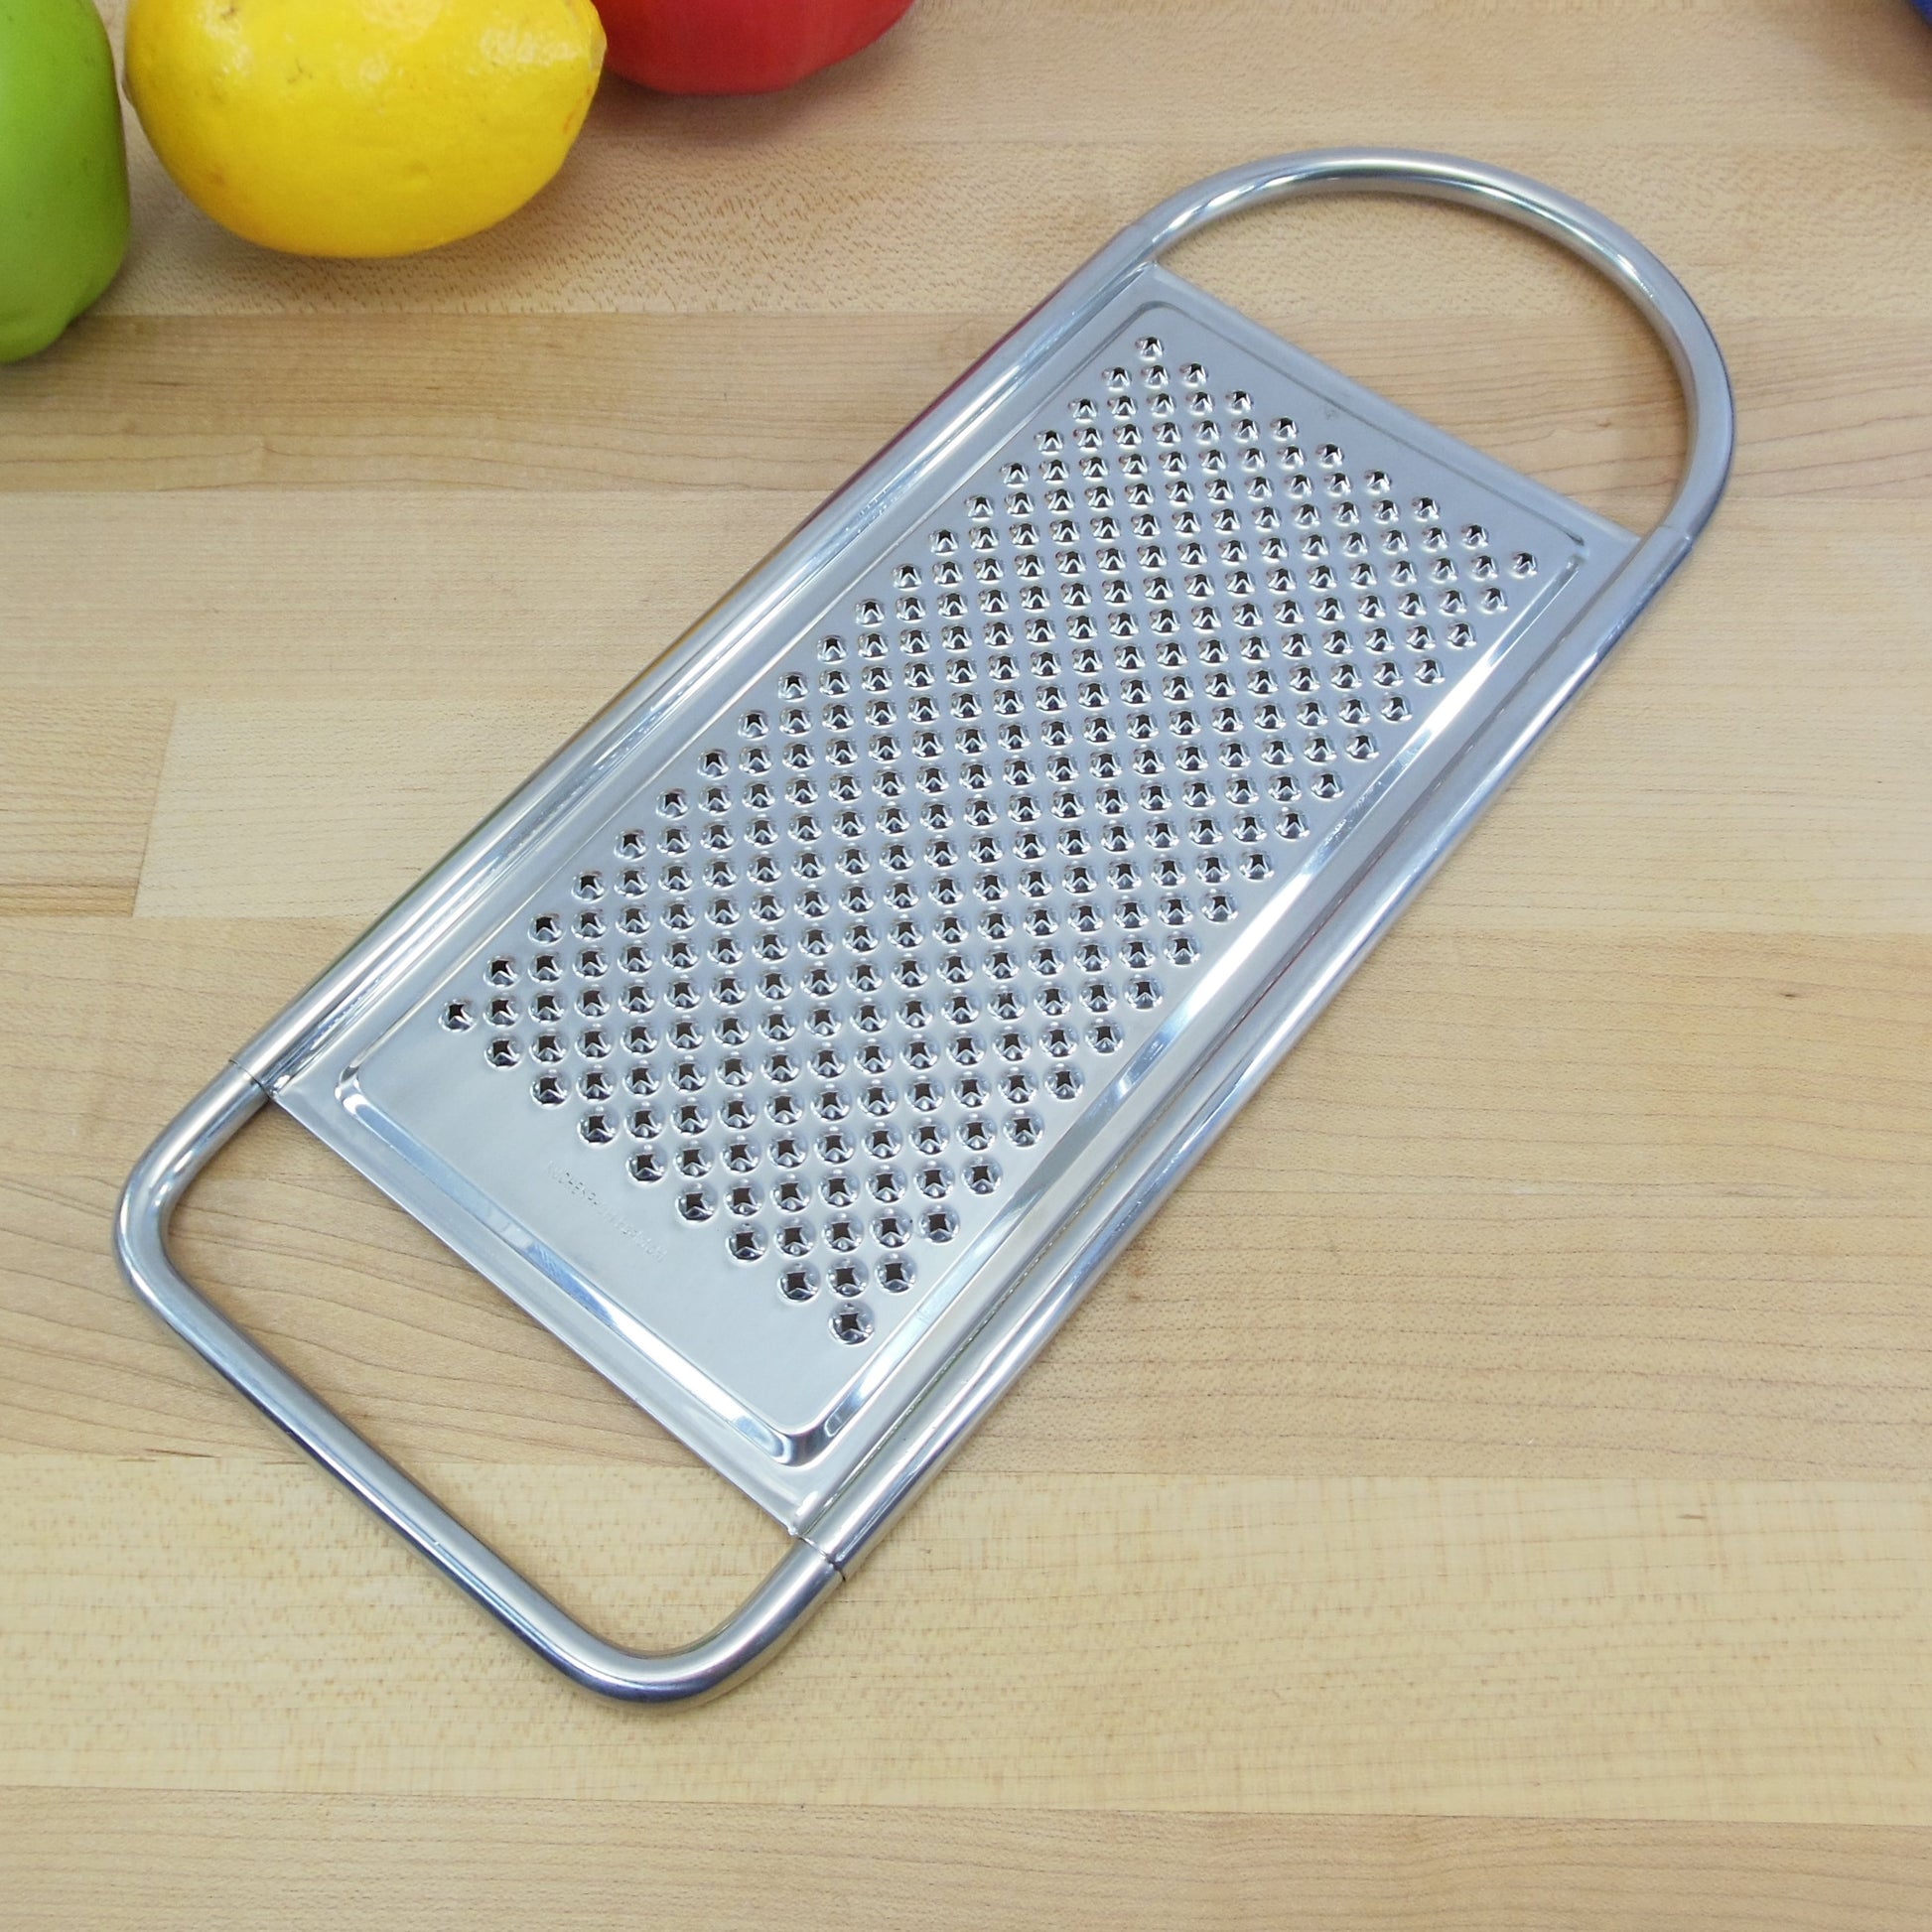 Küchenprofi Germany Raw Diet Cheese Board Grater Professional Stainless